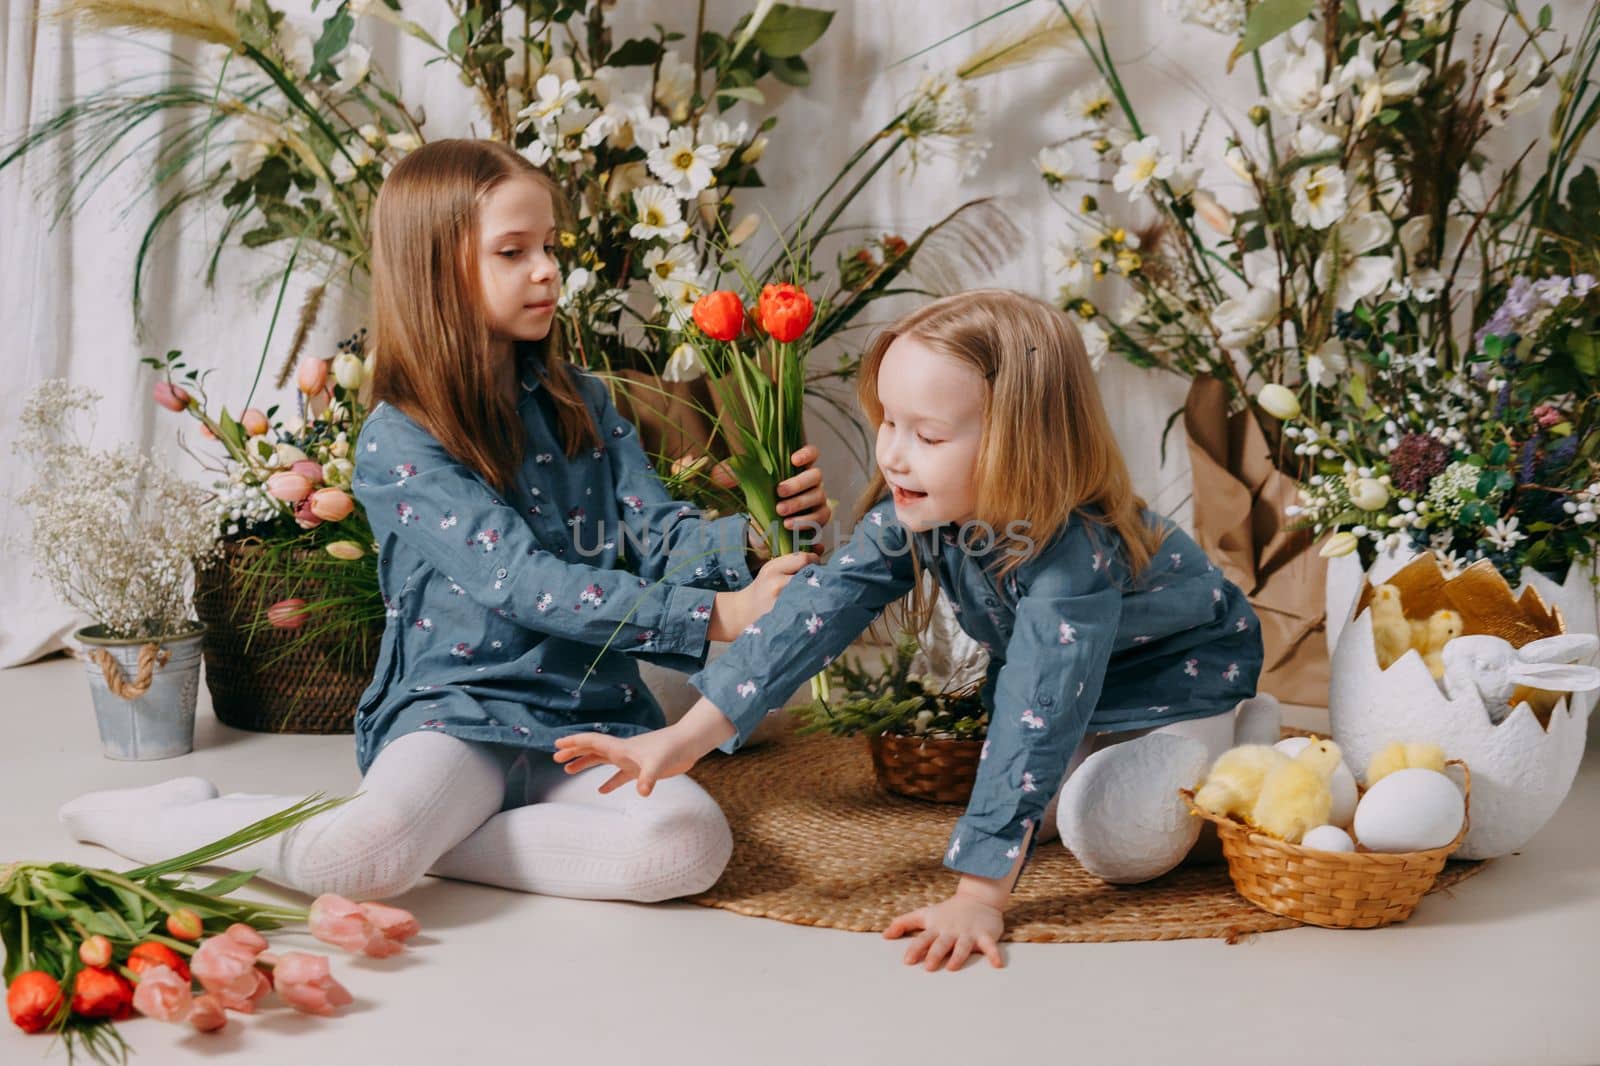 Two girls in a beautiful Easter photo zone with flowers, eggs, chickens and Easter bunnies. Happy Easter holiday. by Annu1tochka